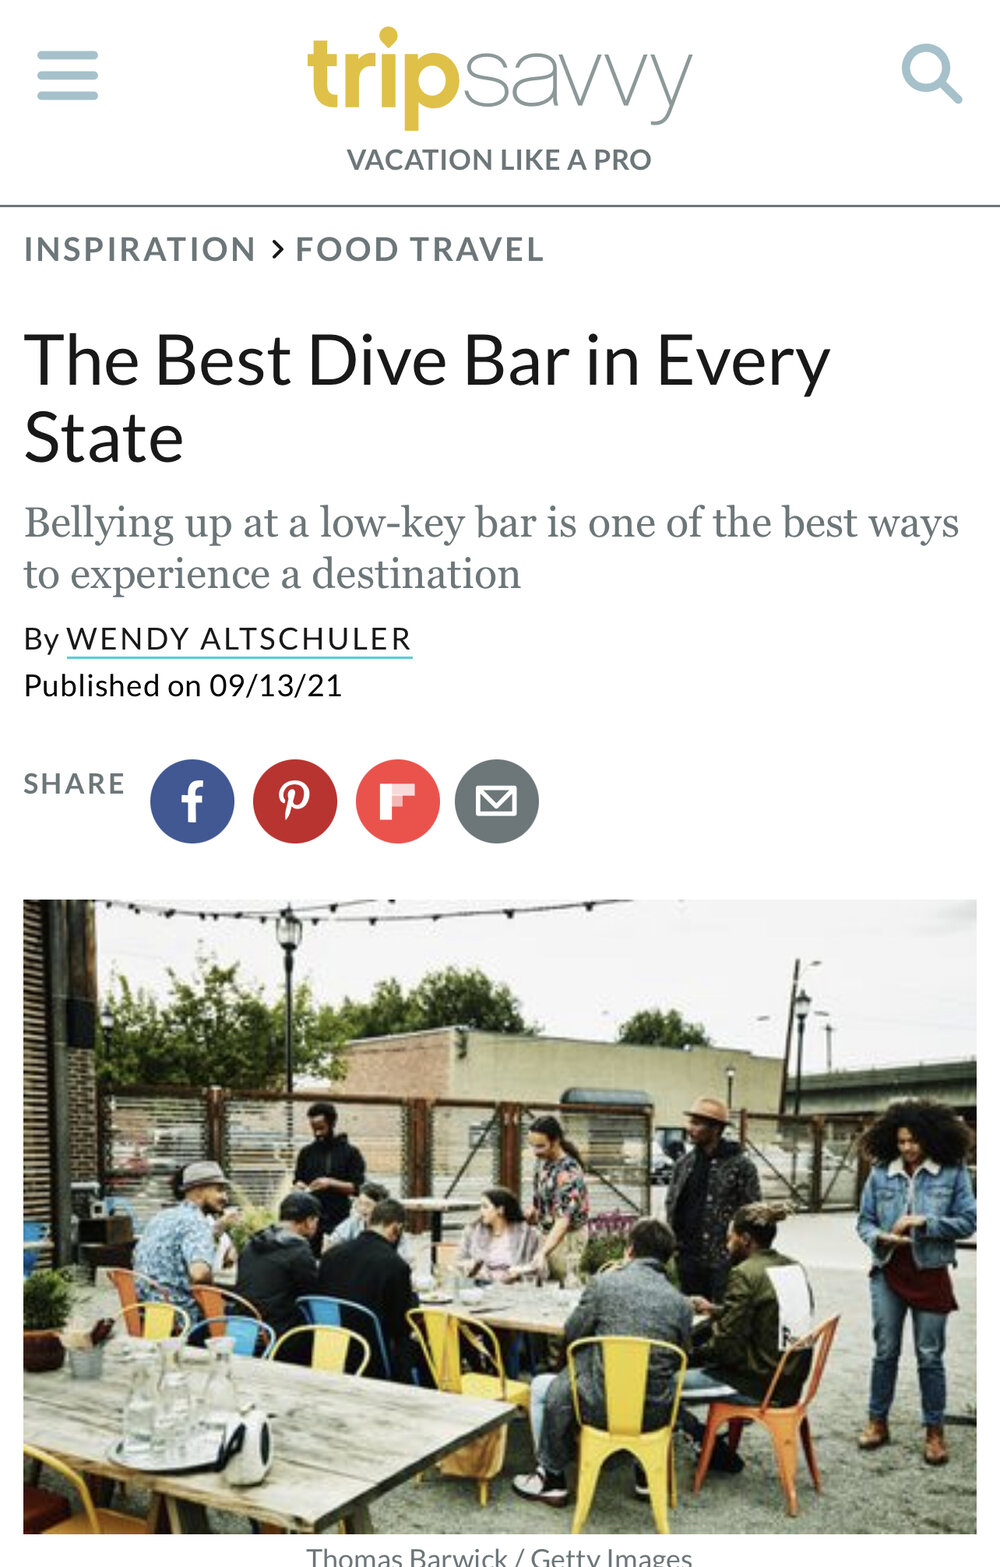 The Best Dive Bar in Every State